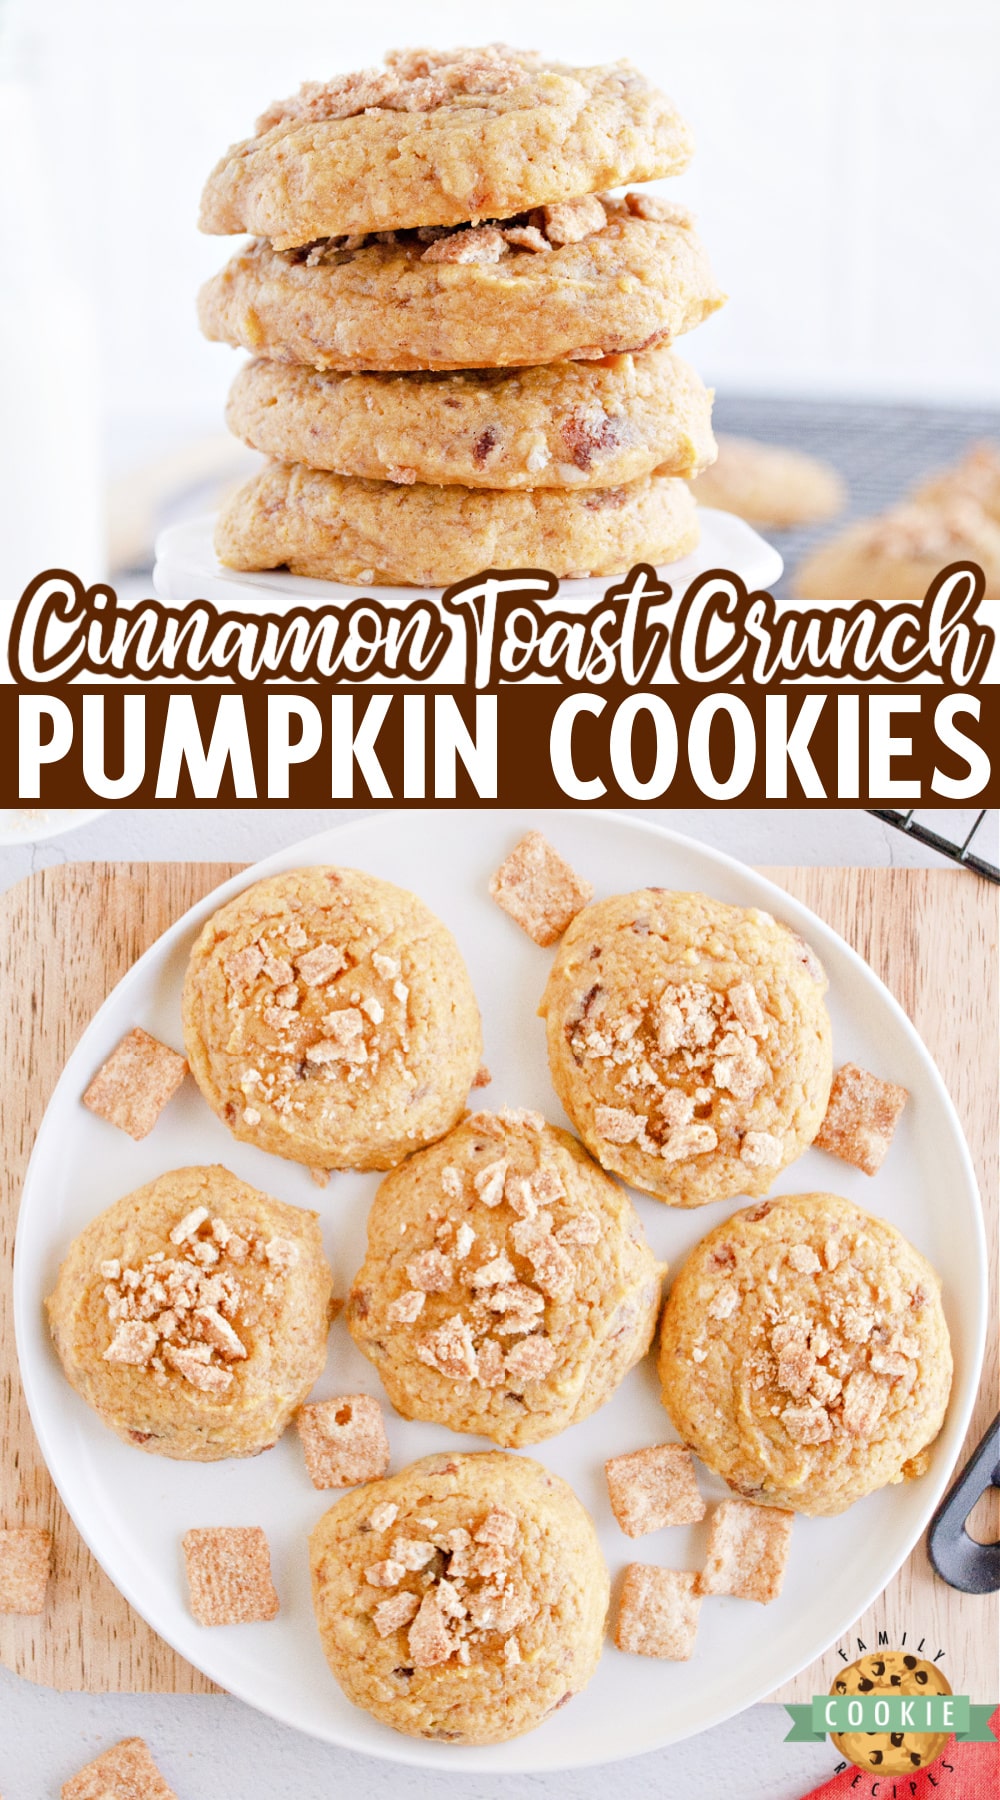 Cinnamon Toast Crunch Pumpkin Cookies made with a cookie mix, canned pumpkin and Cinnamon Toast crunch cereal. Only 5 ingredients needed to make this delicious pumpkin cookie recipe!